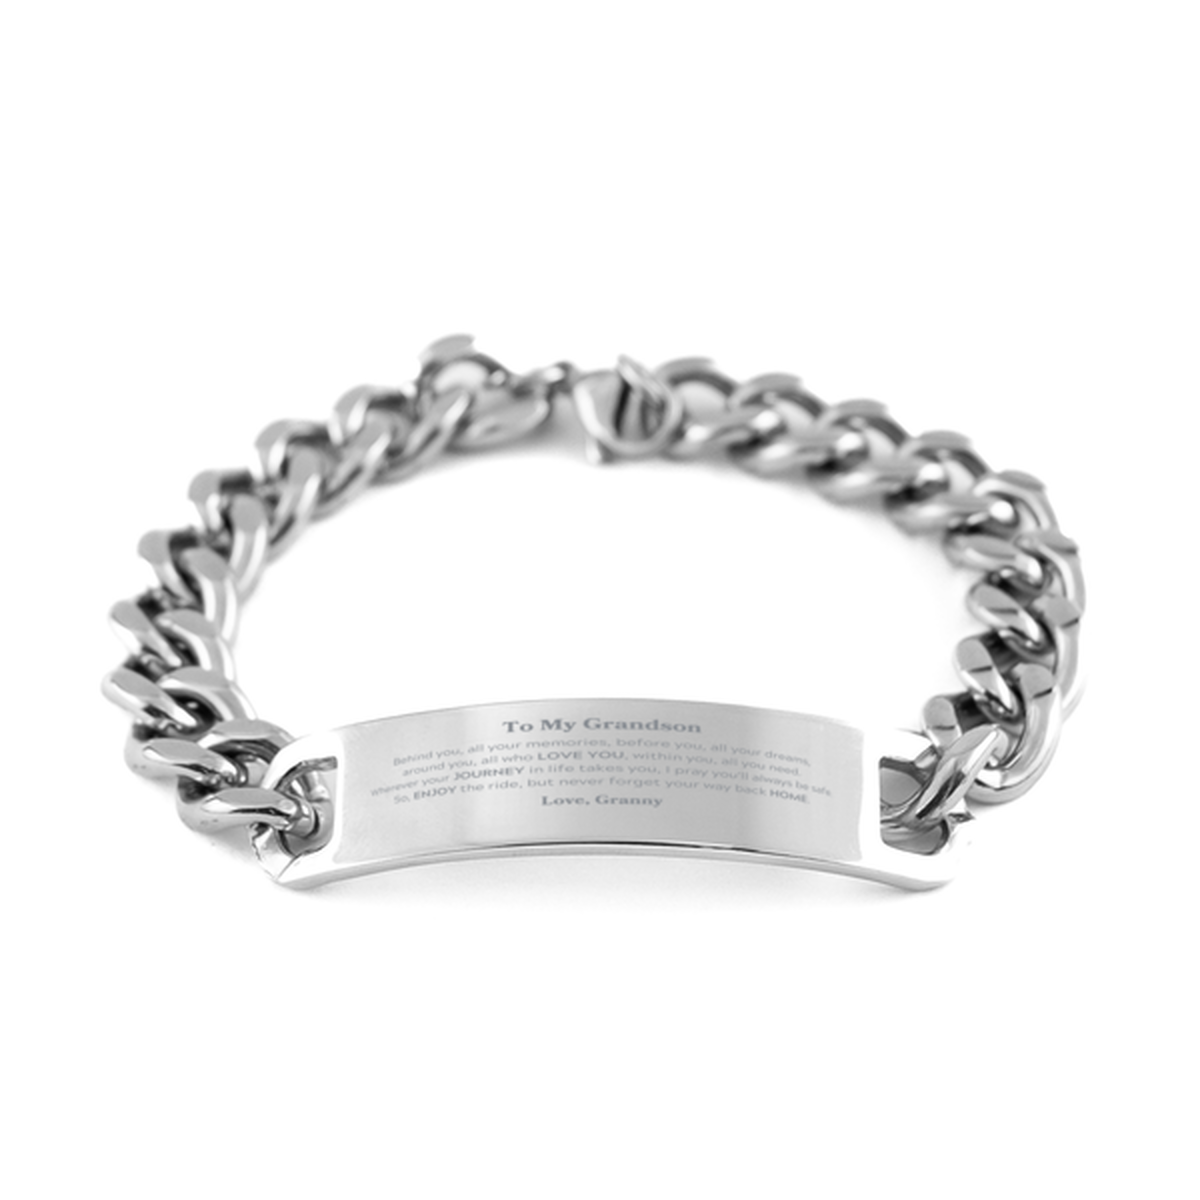 To My Grandson Graduation Gifts from Granny, Grandson Cuban Chain Stainless Steel Bracelet Christmas Birthday Gifts for Grandson Behind you, all your memories, before you, all your dreams. Love, Granny